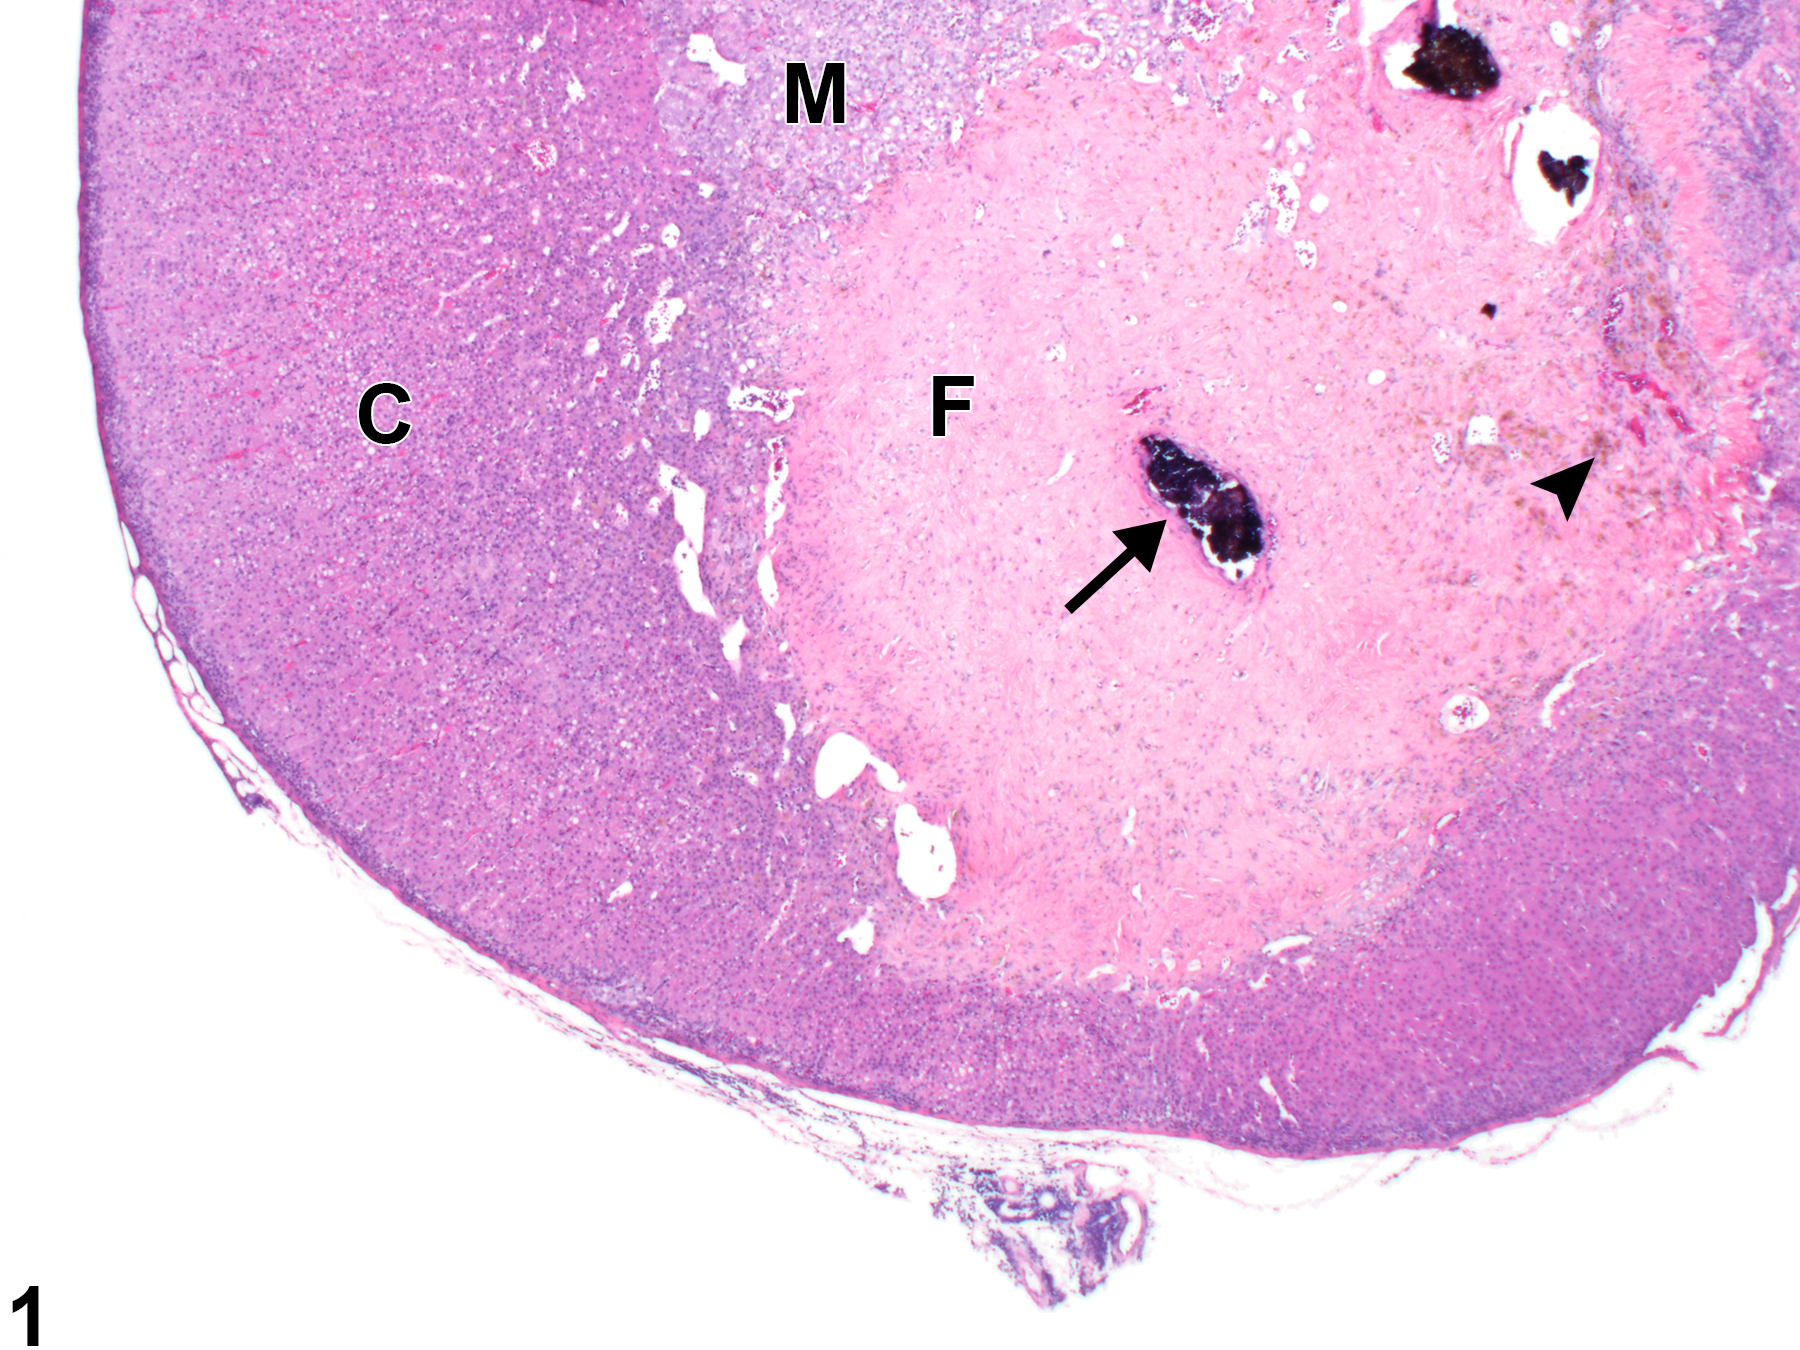 Image of fibrosis in the adrenal gland from a female F344/N rat in a chronic study